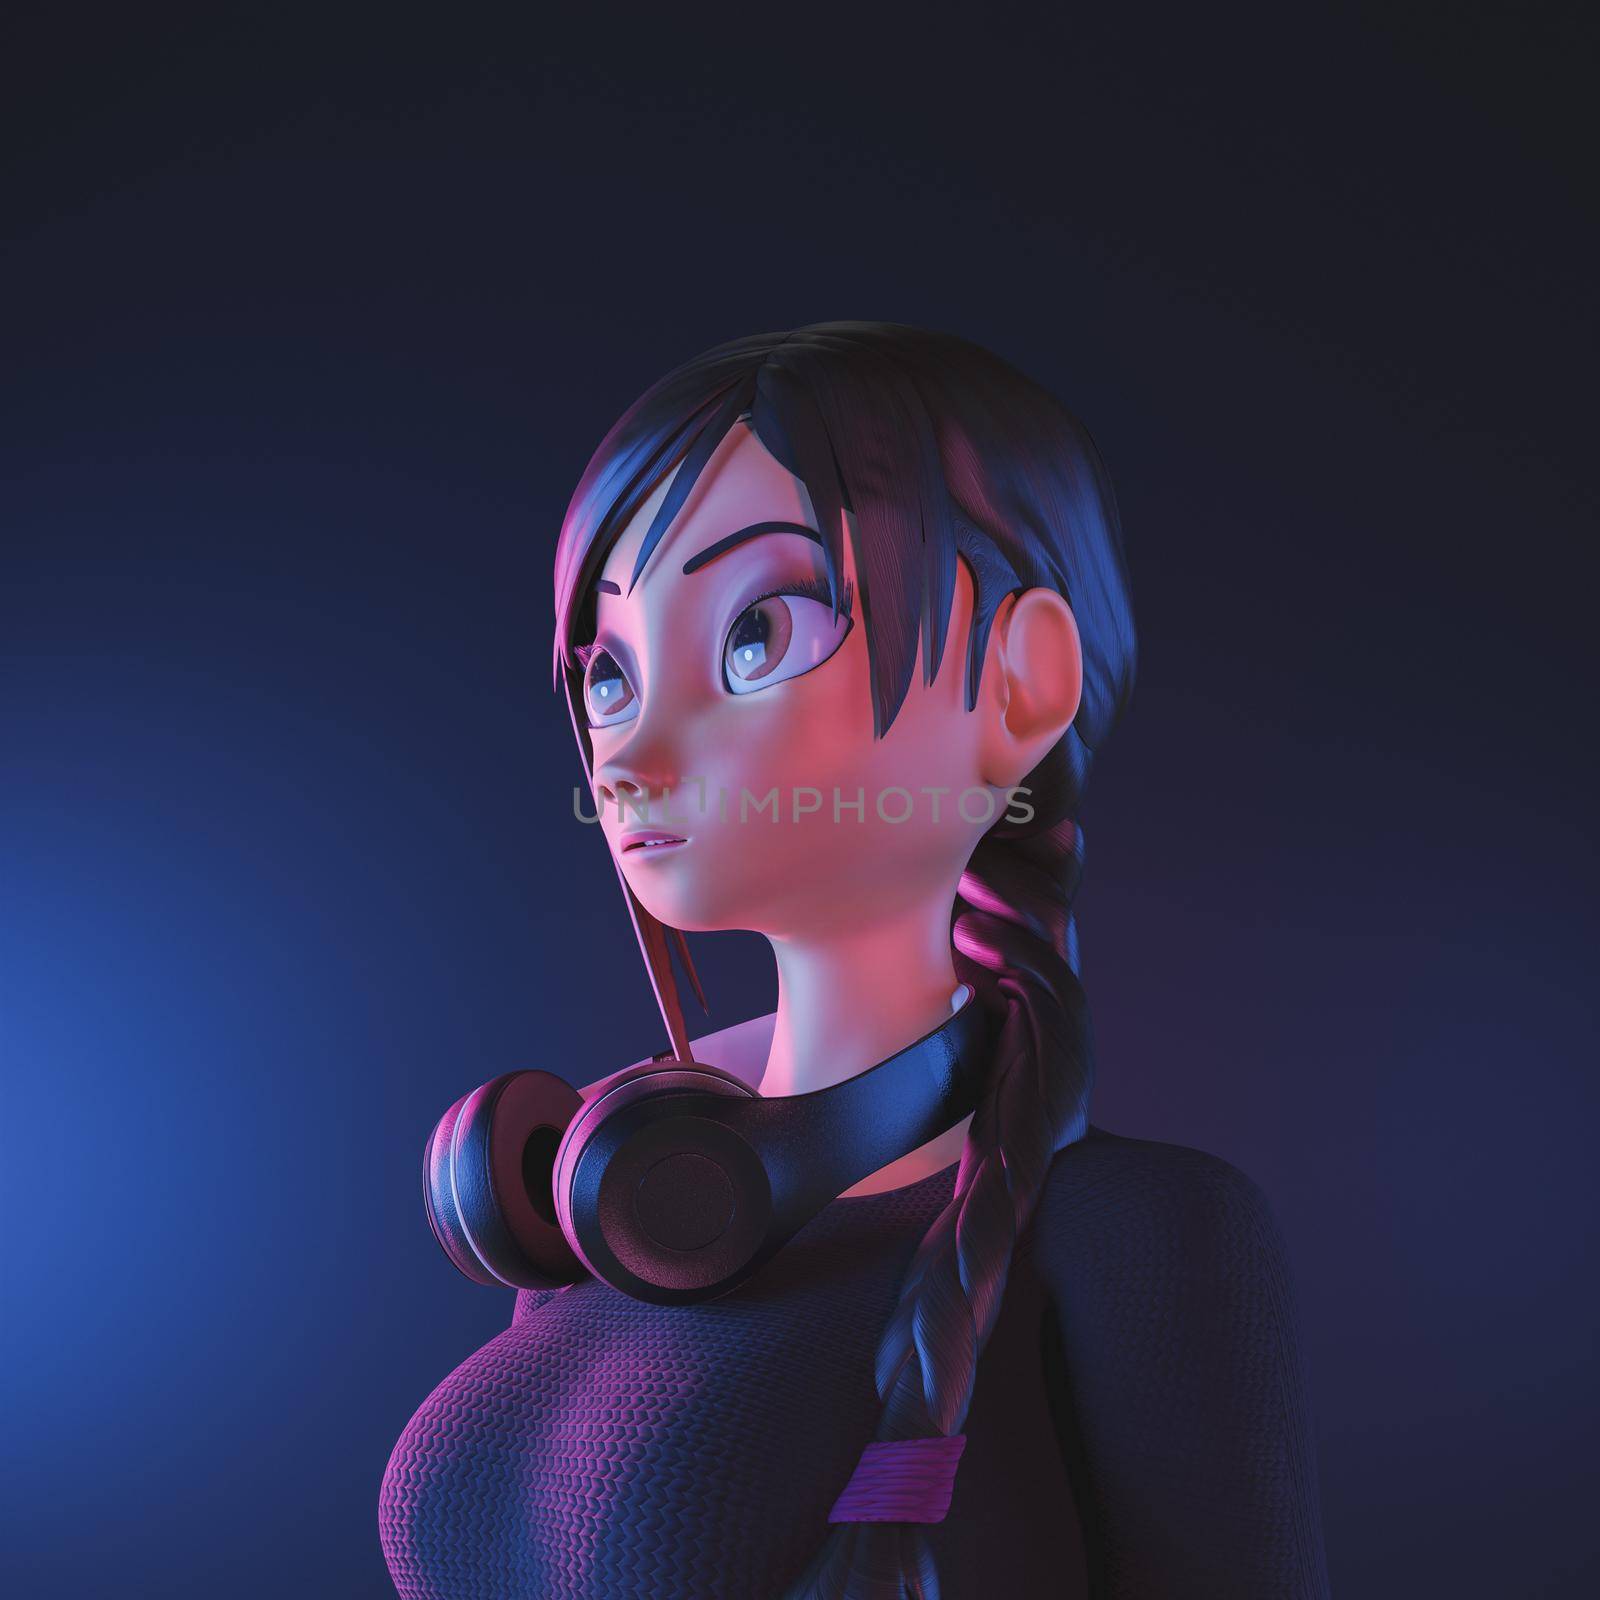 girl portrait with headphones and neon lighting. 3d render stylized character